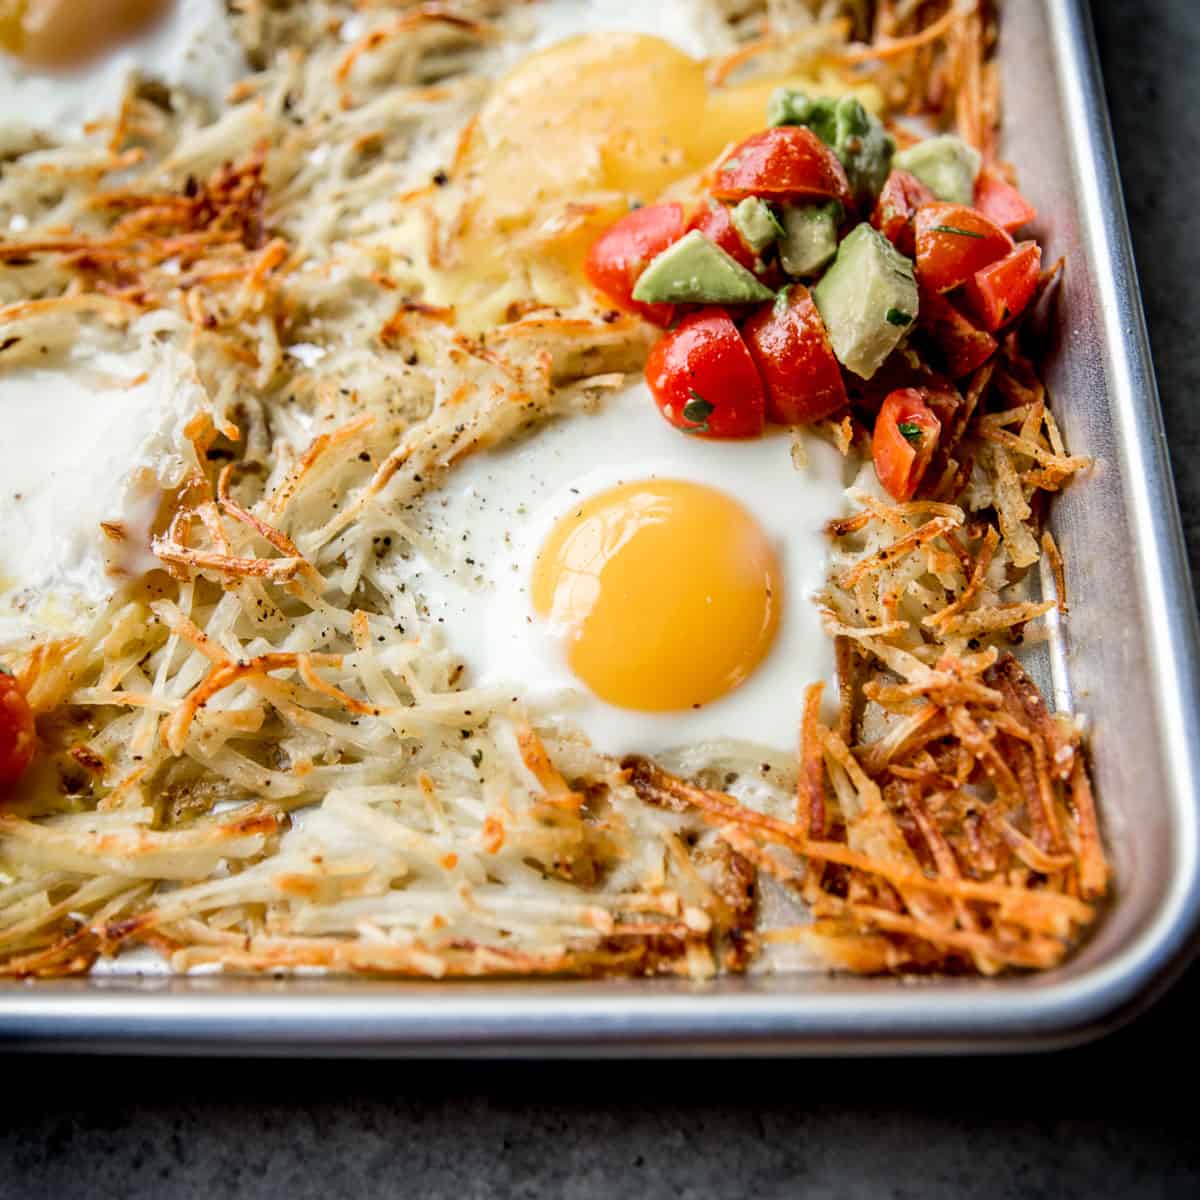 Frozen Hashbrowns in Oven - Oven Hash Browns on Sheet Pan